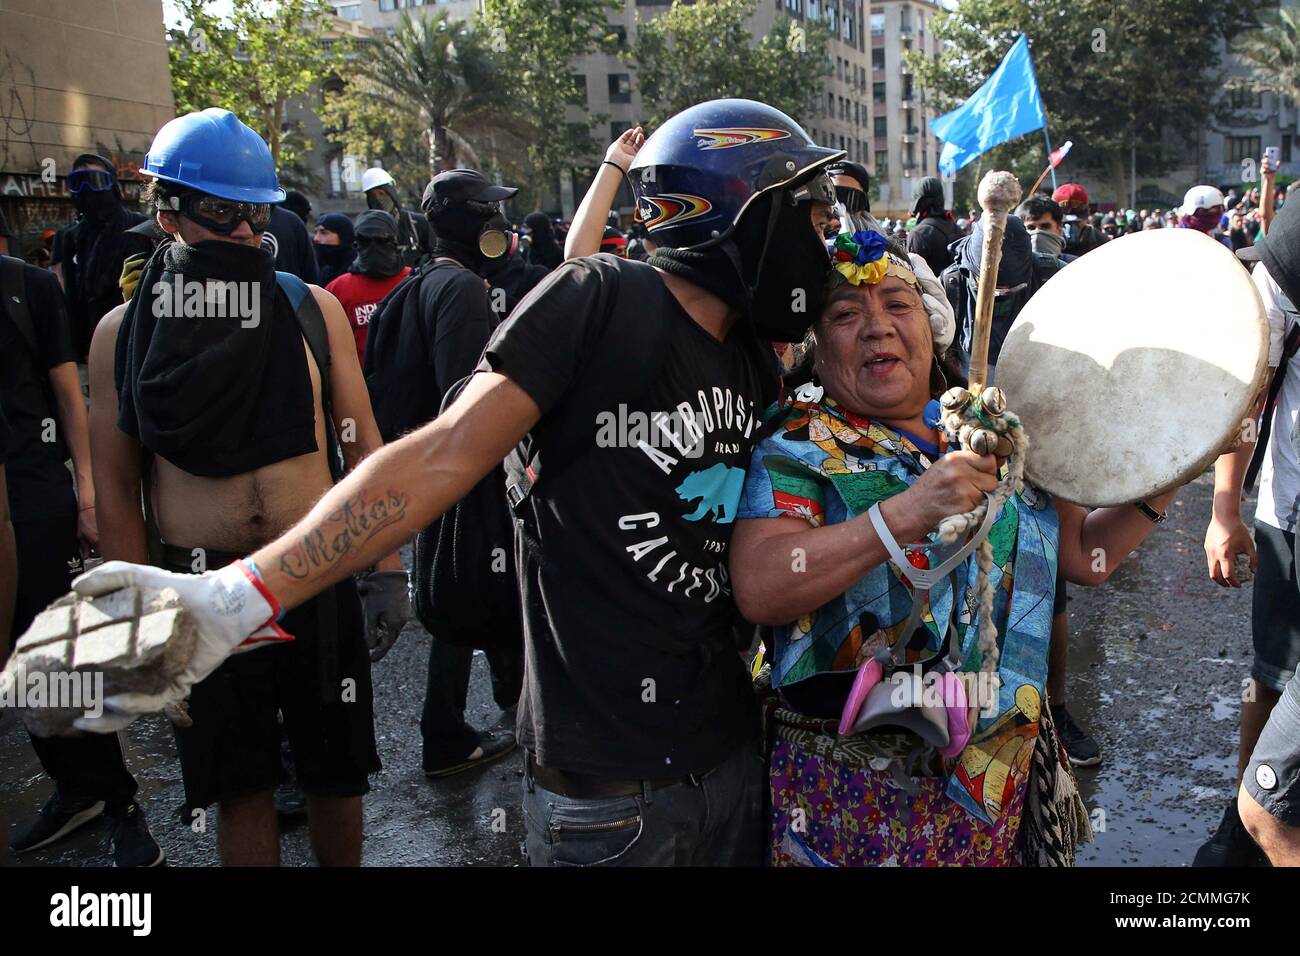 A demonstrator kisses a Mapuche woman during anti-government protests in Santiago, Chile January 24, 2020. REUTERS/Edgard Garrido Stock Photo